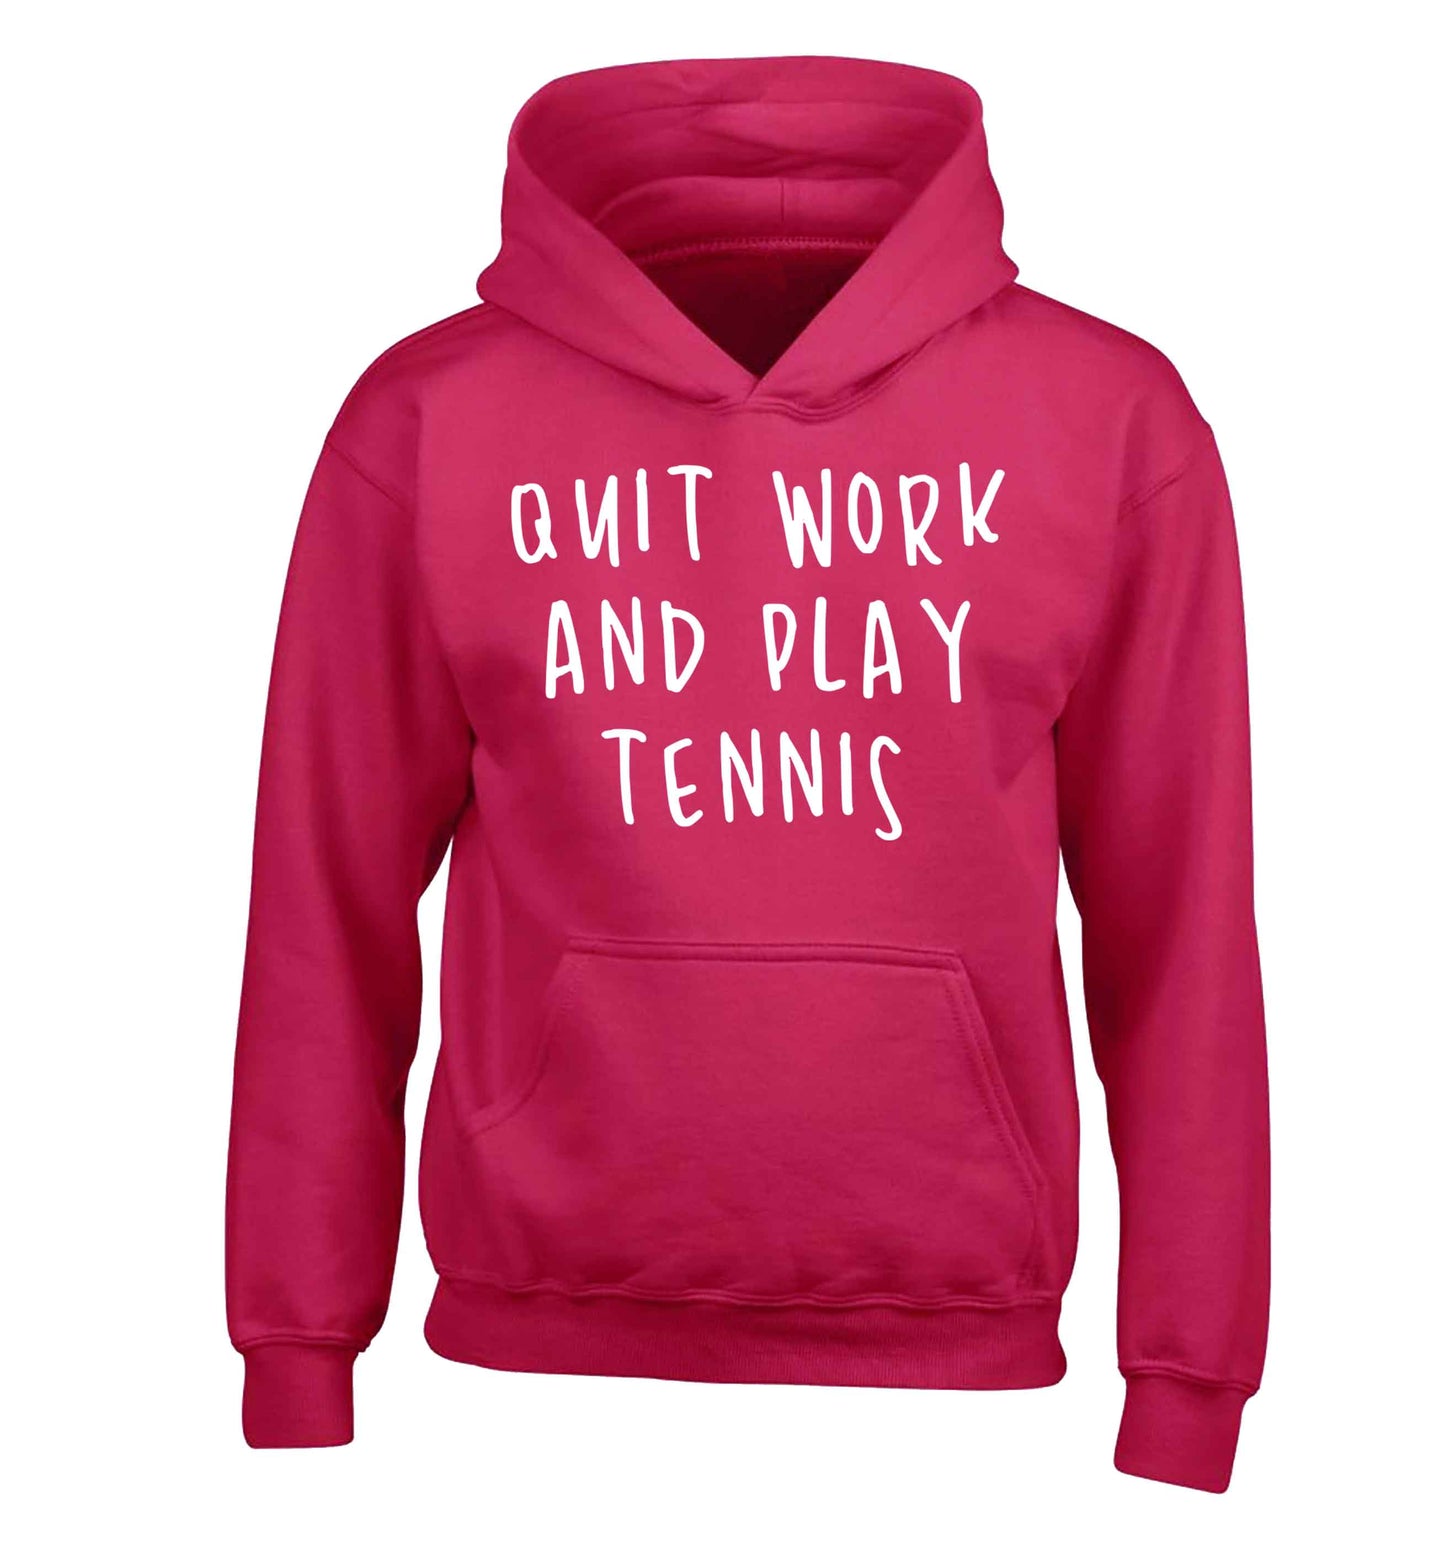 Quit work and play tennis children's pink hoodie 12-13 Years